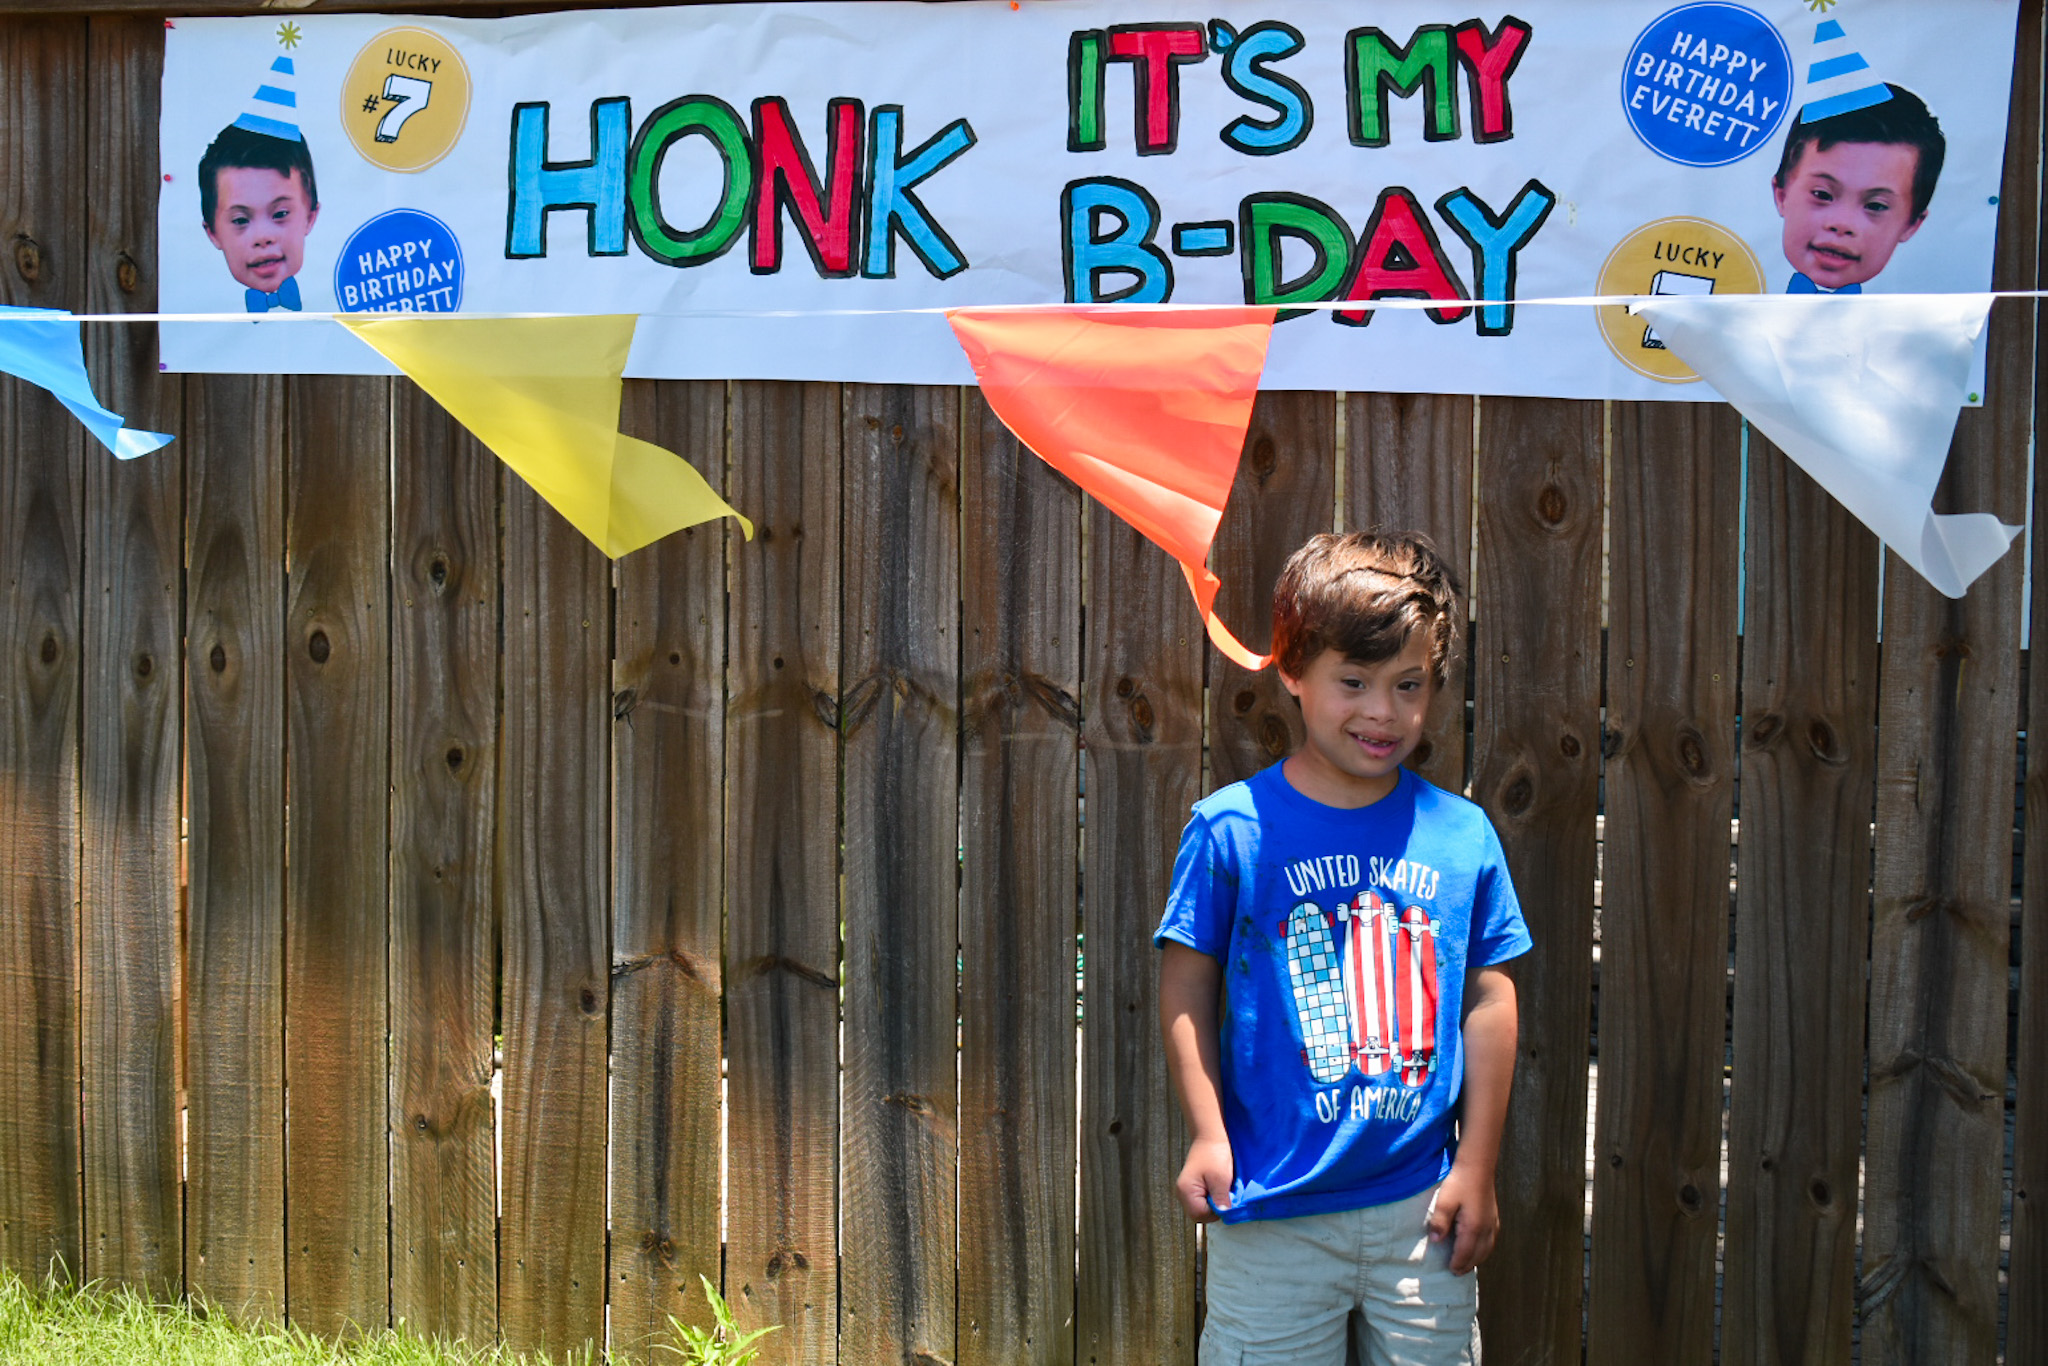 The Drive-by Birthday Party – A trend I hope sticks around!